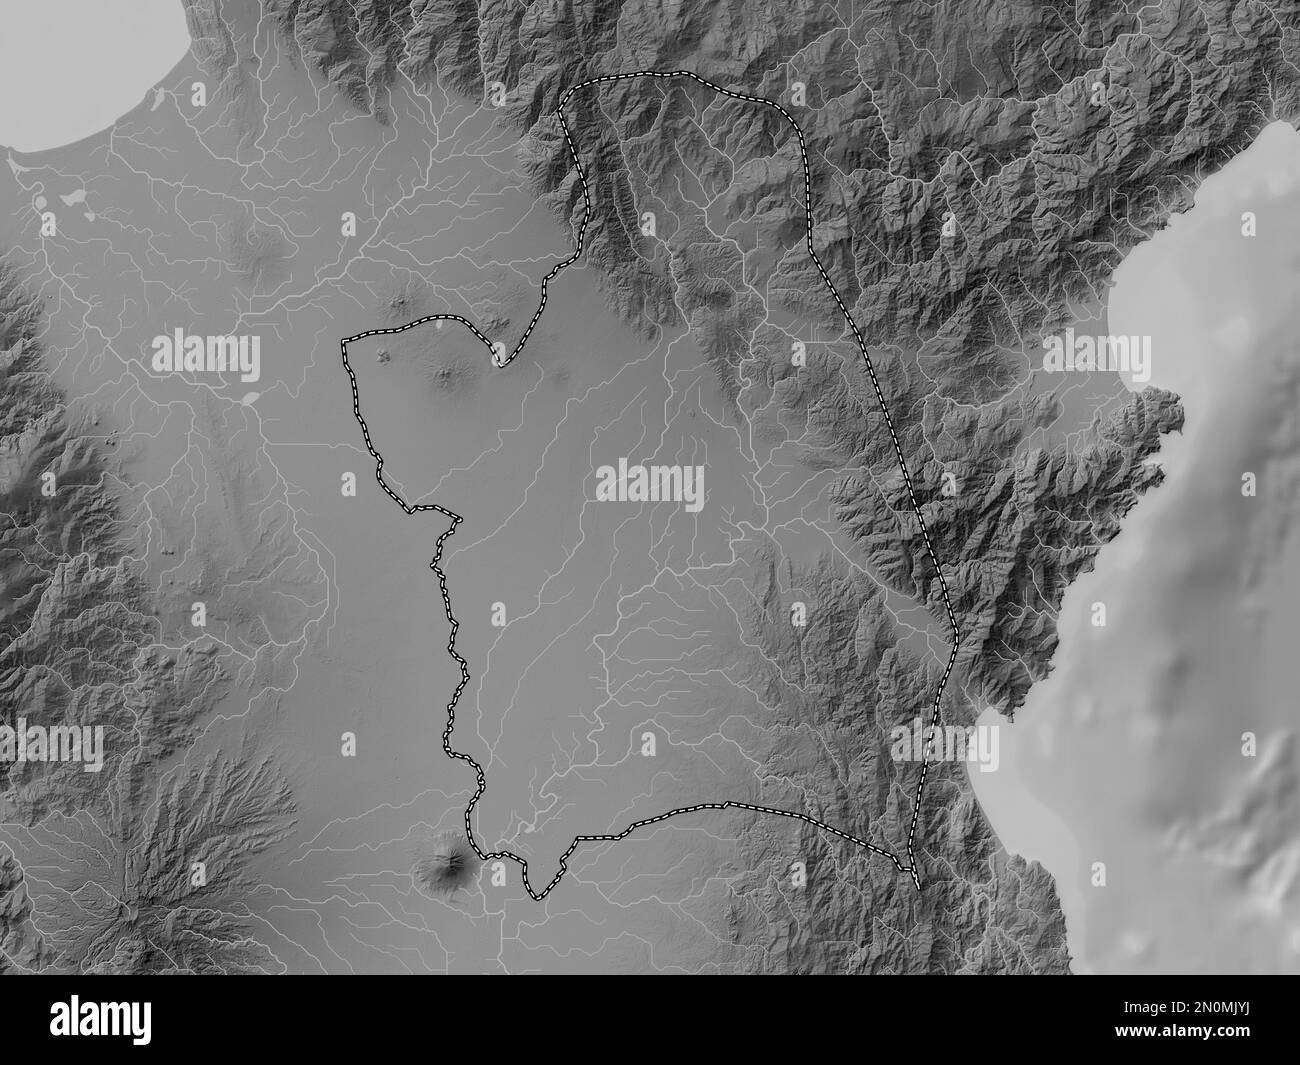 Nueva Ecija, province of Philippines. Grayscale elevation map with lakes and rivers Stock Photo